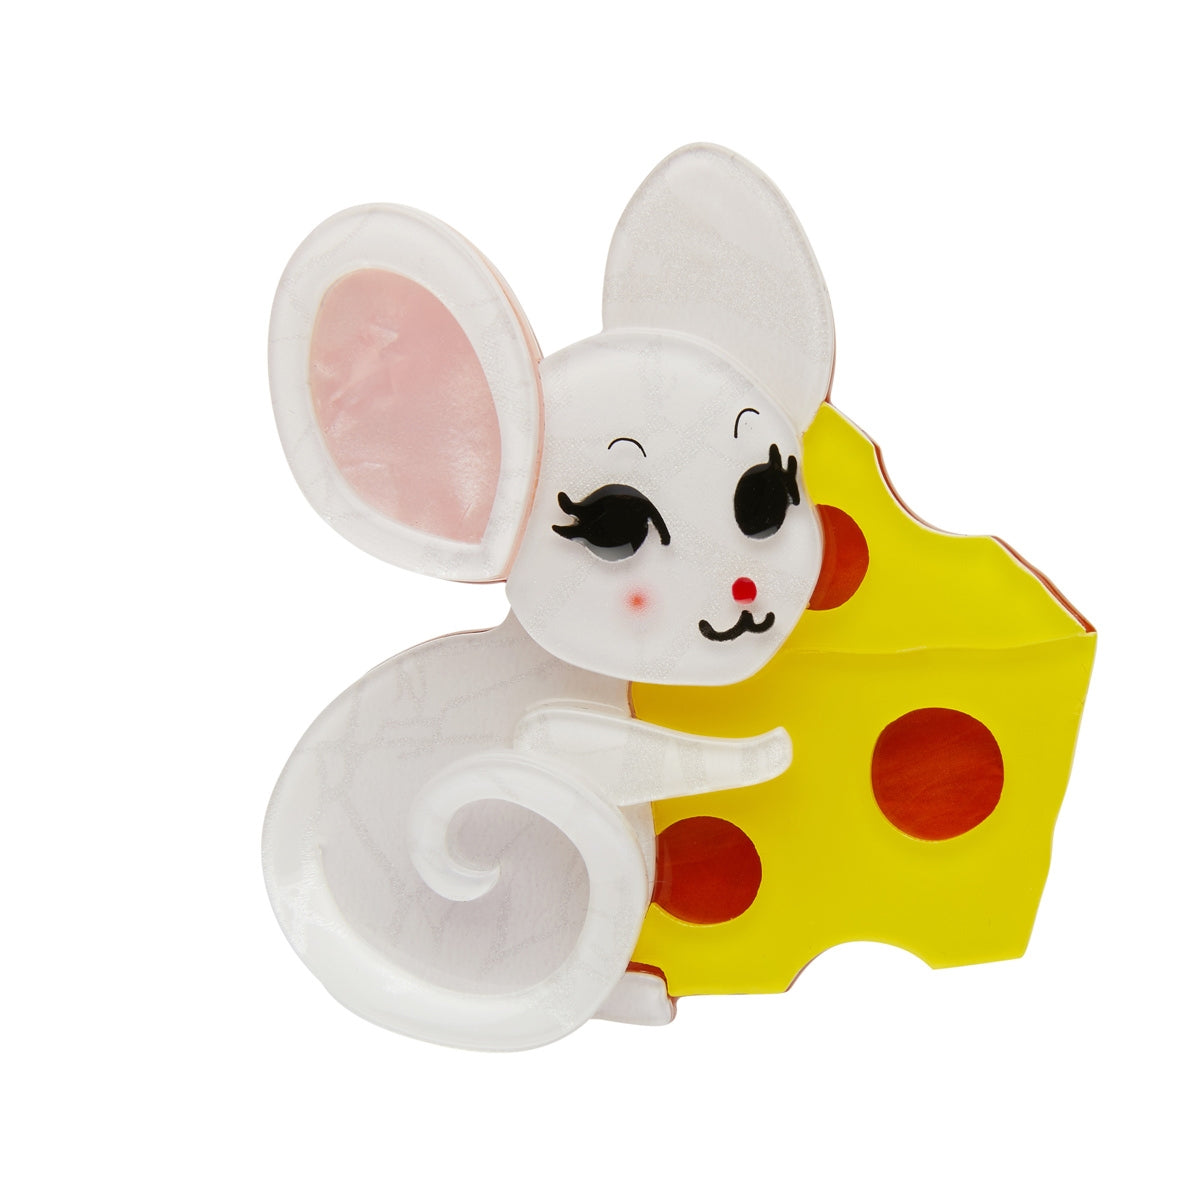 2 3/8" "Not Even a Mouse" sweet little pearly white mouse with a big wedge of yellow Swiss cheese layered resin brooch